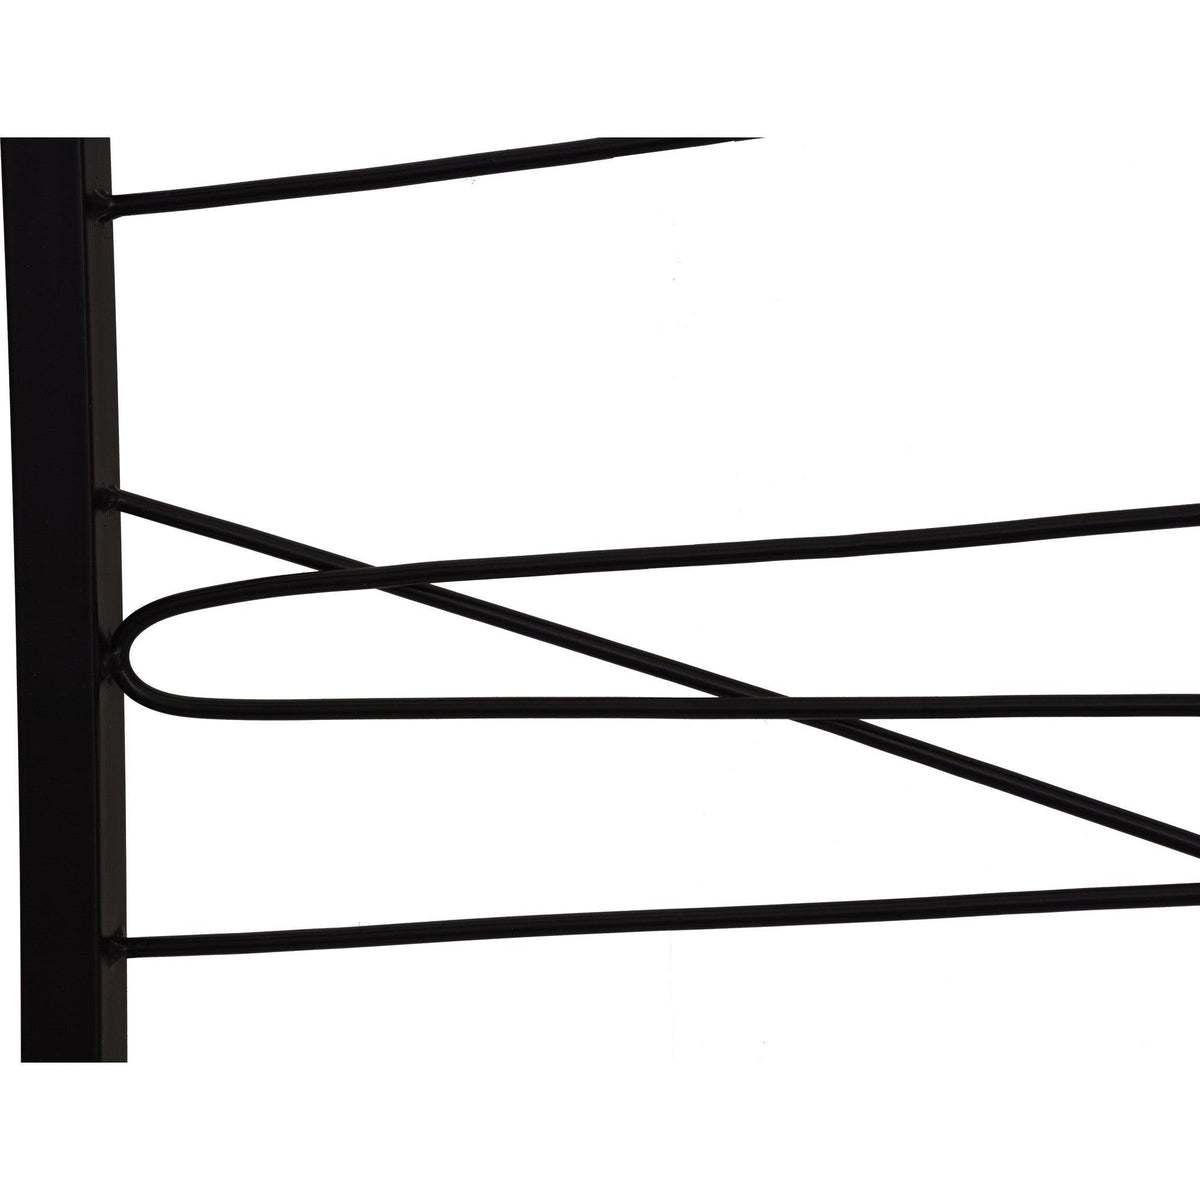 Montreal Lighting & Hardware - Studio Line Linear Set of 3 Iron Wall Art by Renwil | OPEN BOX - w6556-OB | Montreal Lighting & Hardware